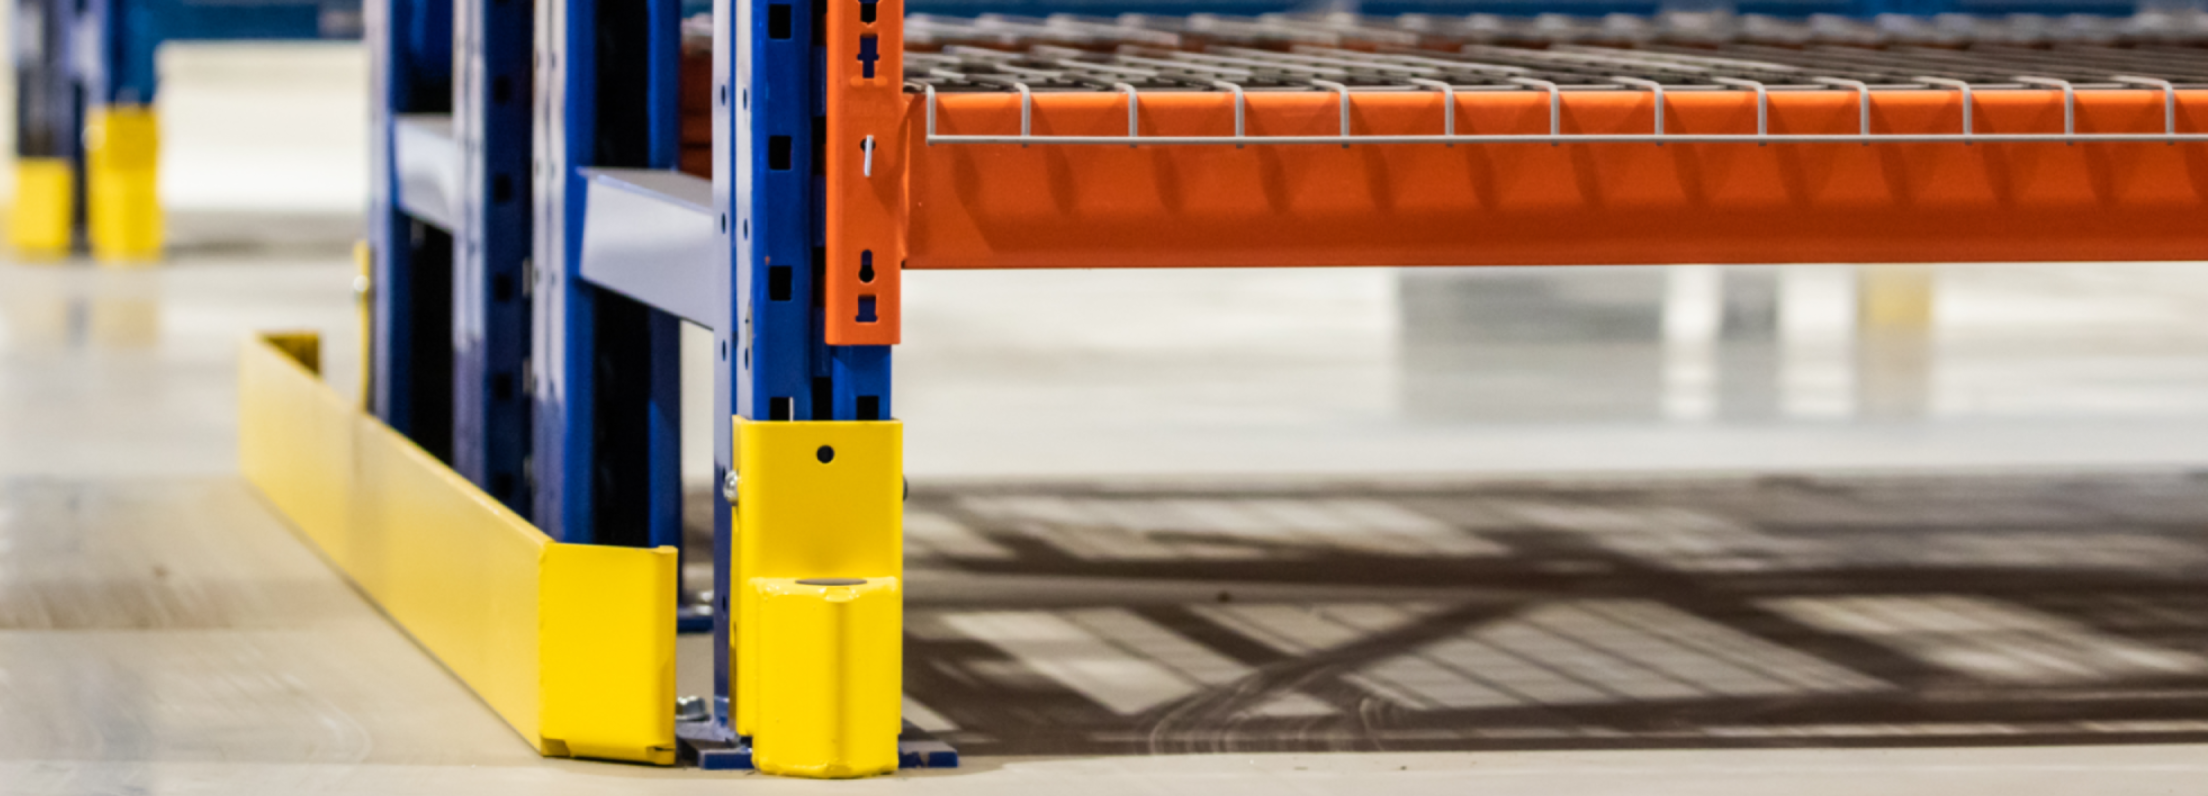 Adding steel in the right places in a pallet racking system